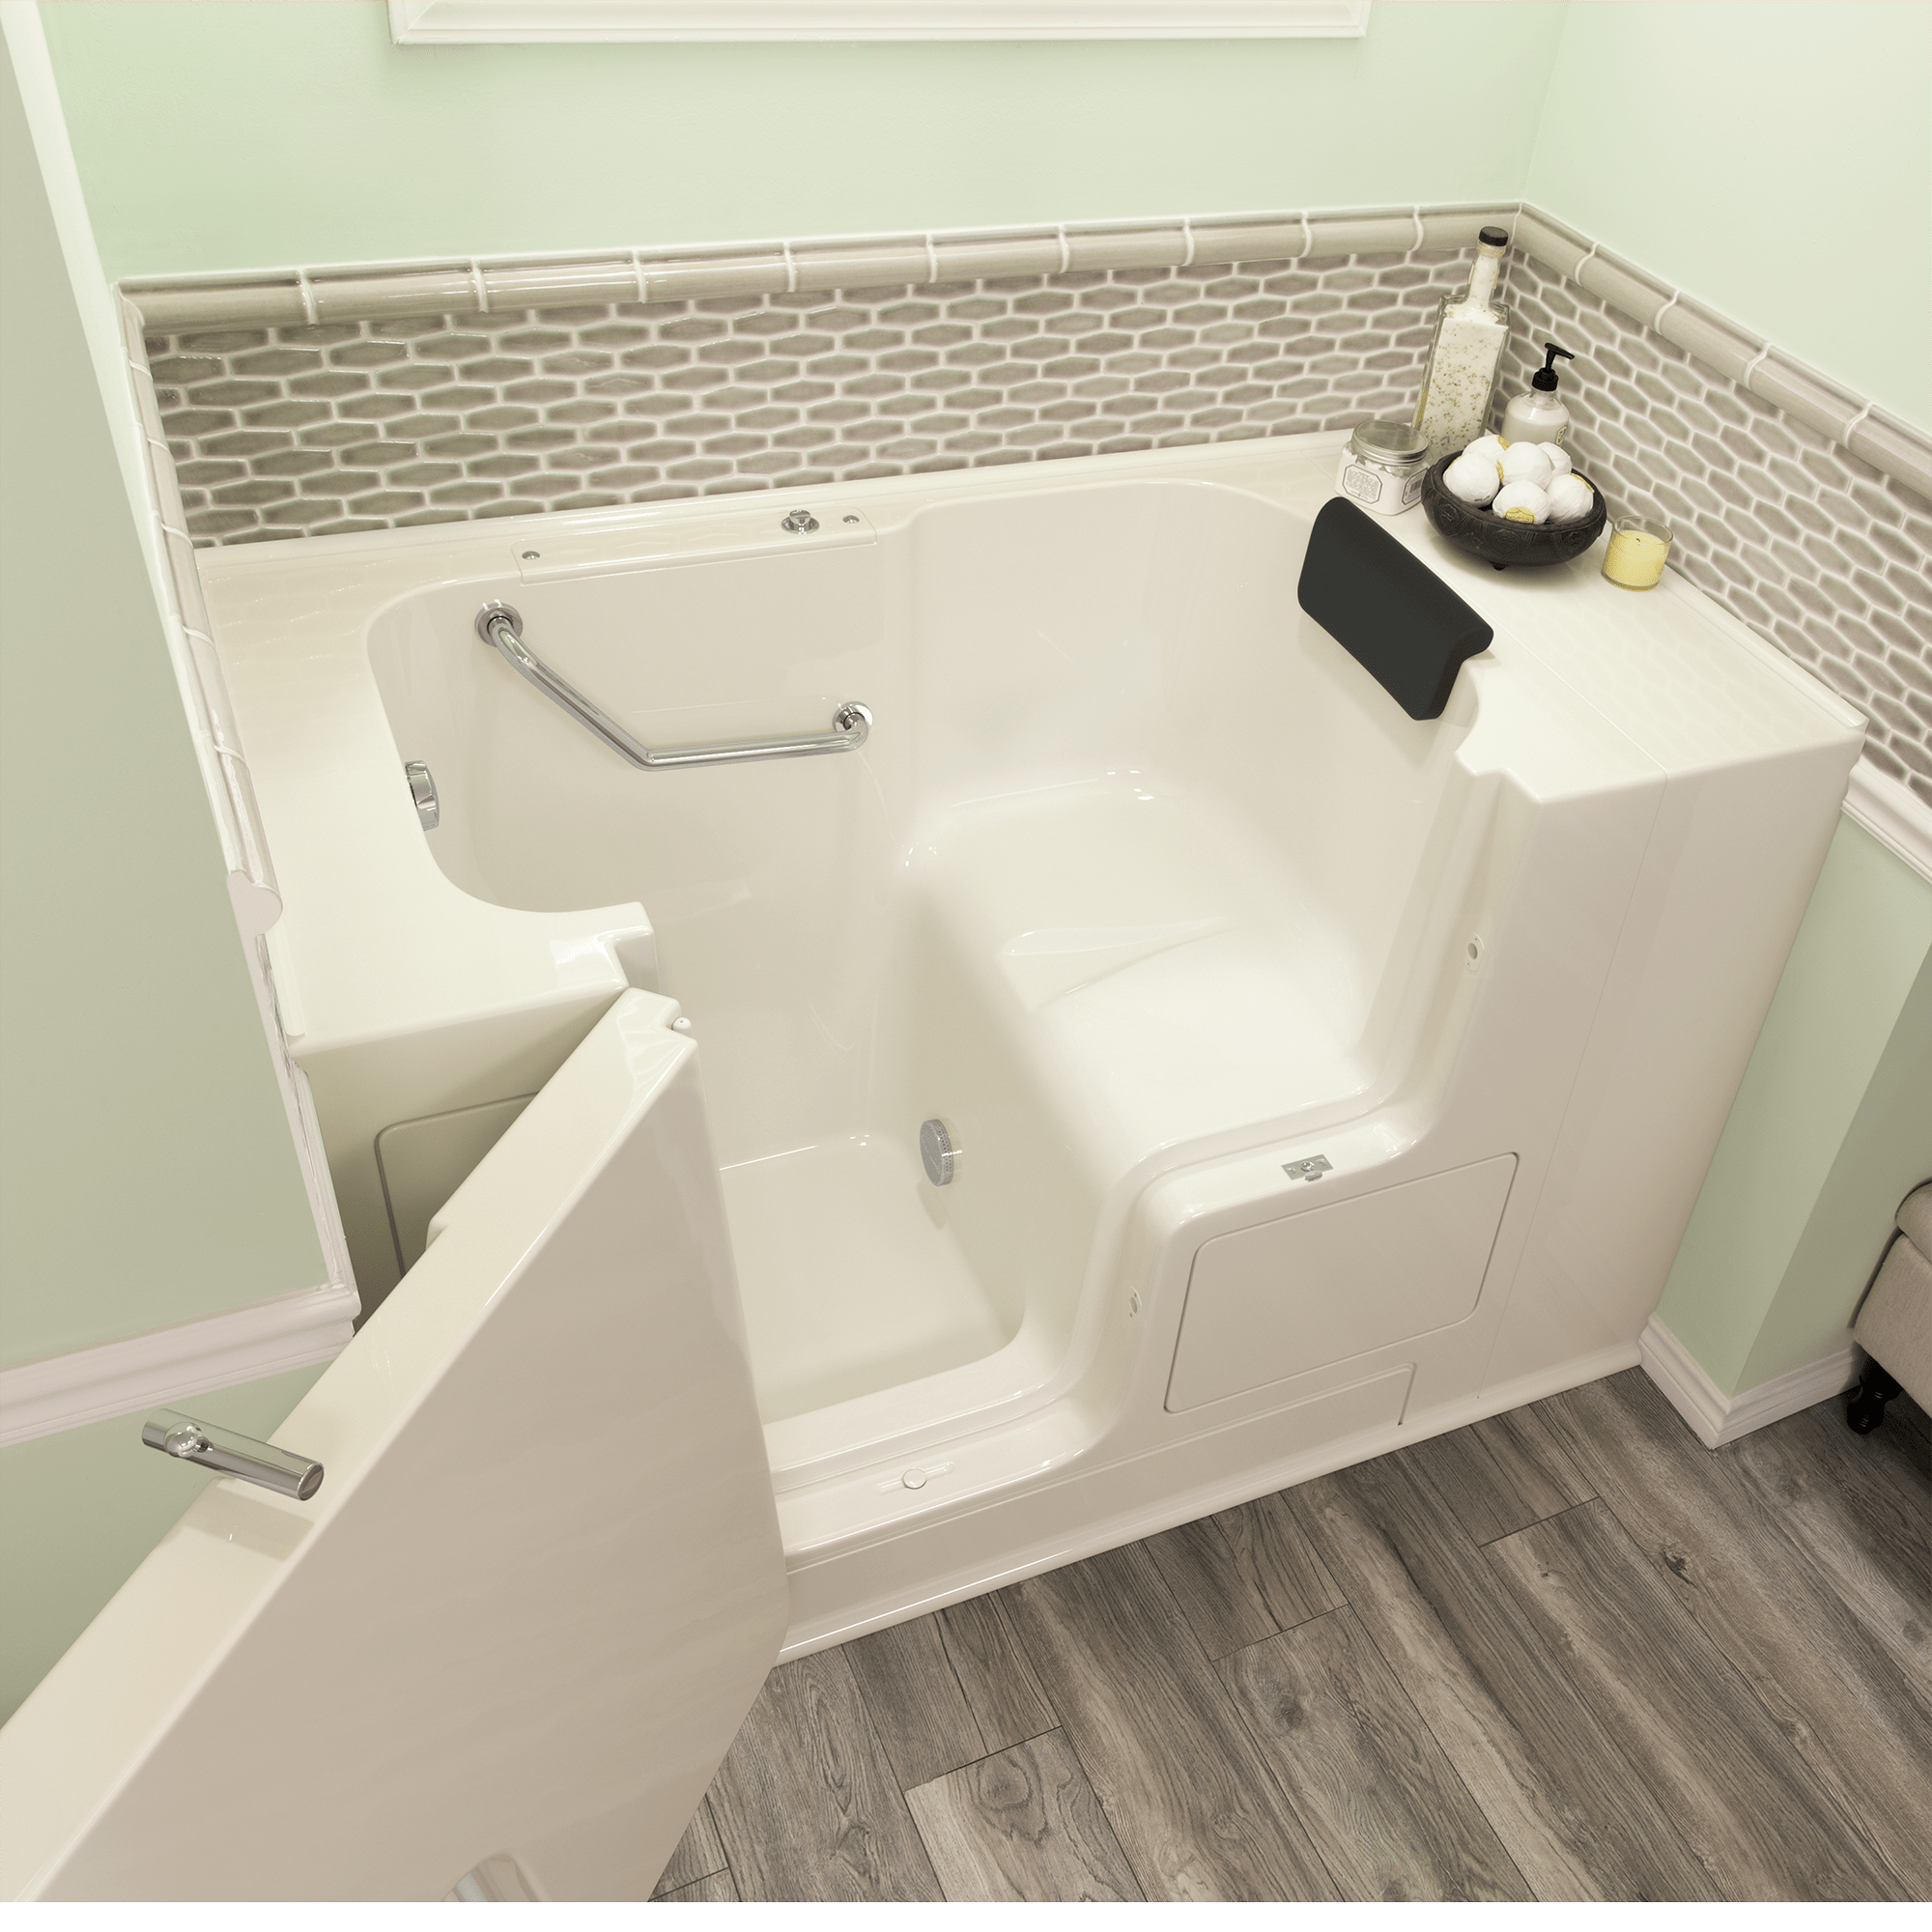 Gelcoat Premium Series 32 x 52 -Inch Walk-in Tub With Soaker System - Left-Hand Drain